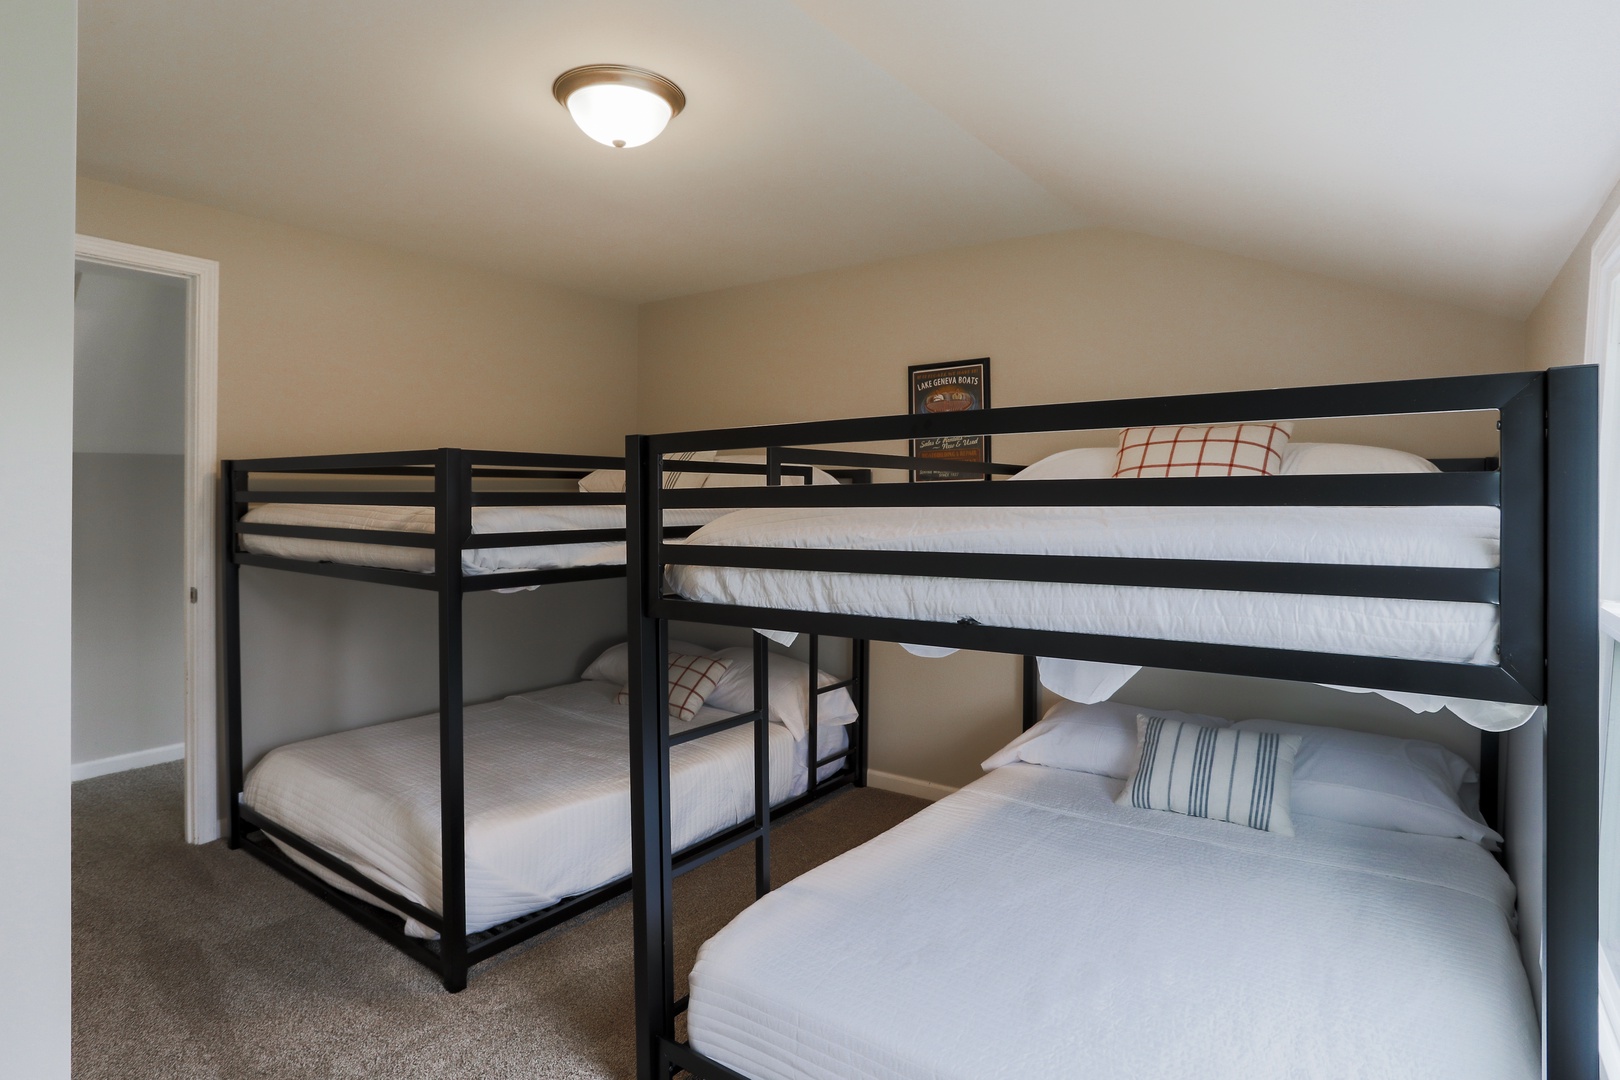 Guests will enjoy 2 full-over-full bunkbeds in the 2nd floor bunk room